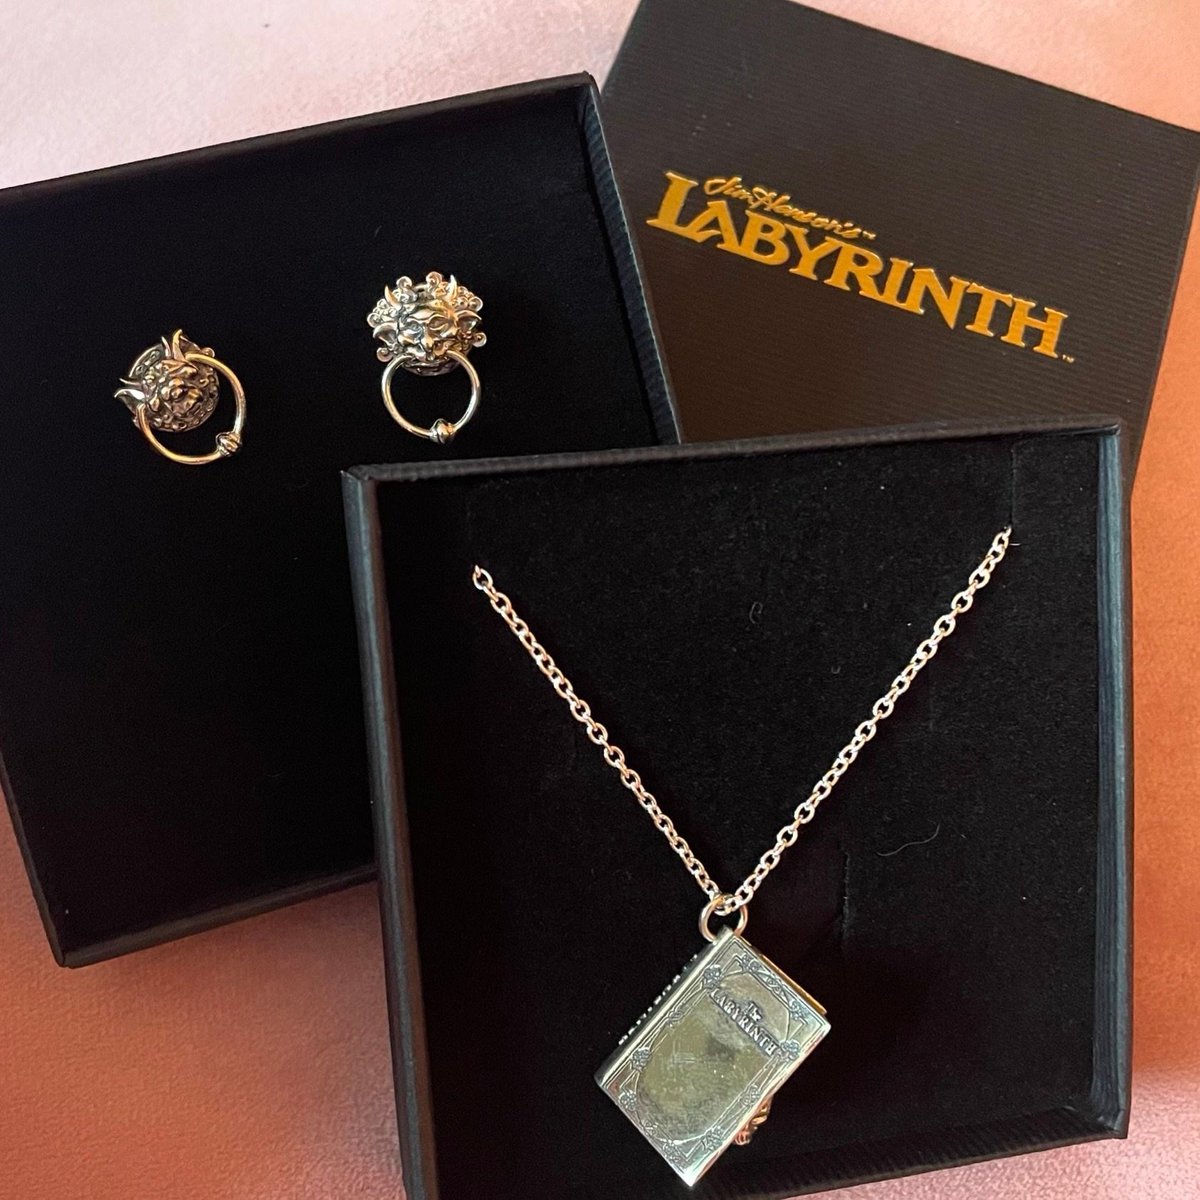 So in love with my #labyrinth Door Knocker Earrings and Character Book Charm Necklace from @LicensedToCharm 📕 ✨

#blogger #fblogger #jewellery #silverjewellery #labyrinthjewellery #jimhensonlabyrinth #labyrinth35thanniversary #licensedtocharm #northamptonblogger #northamoton